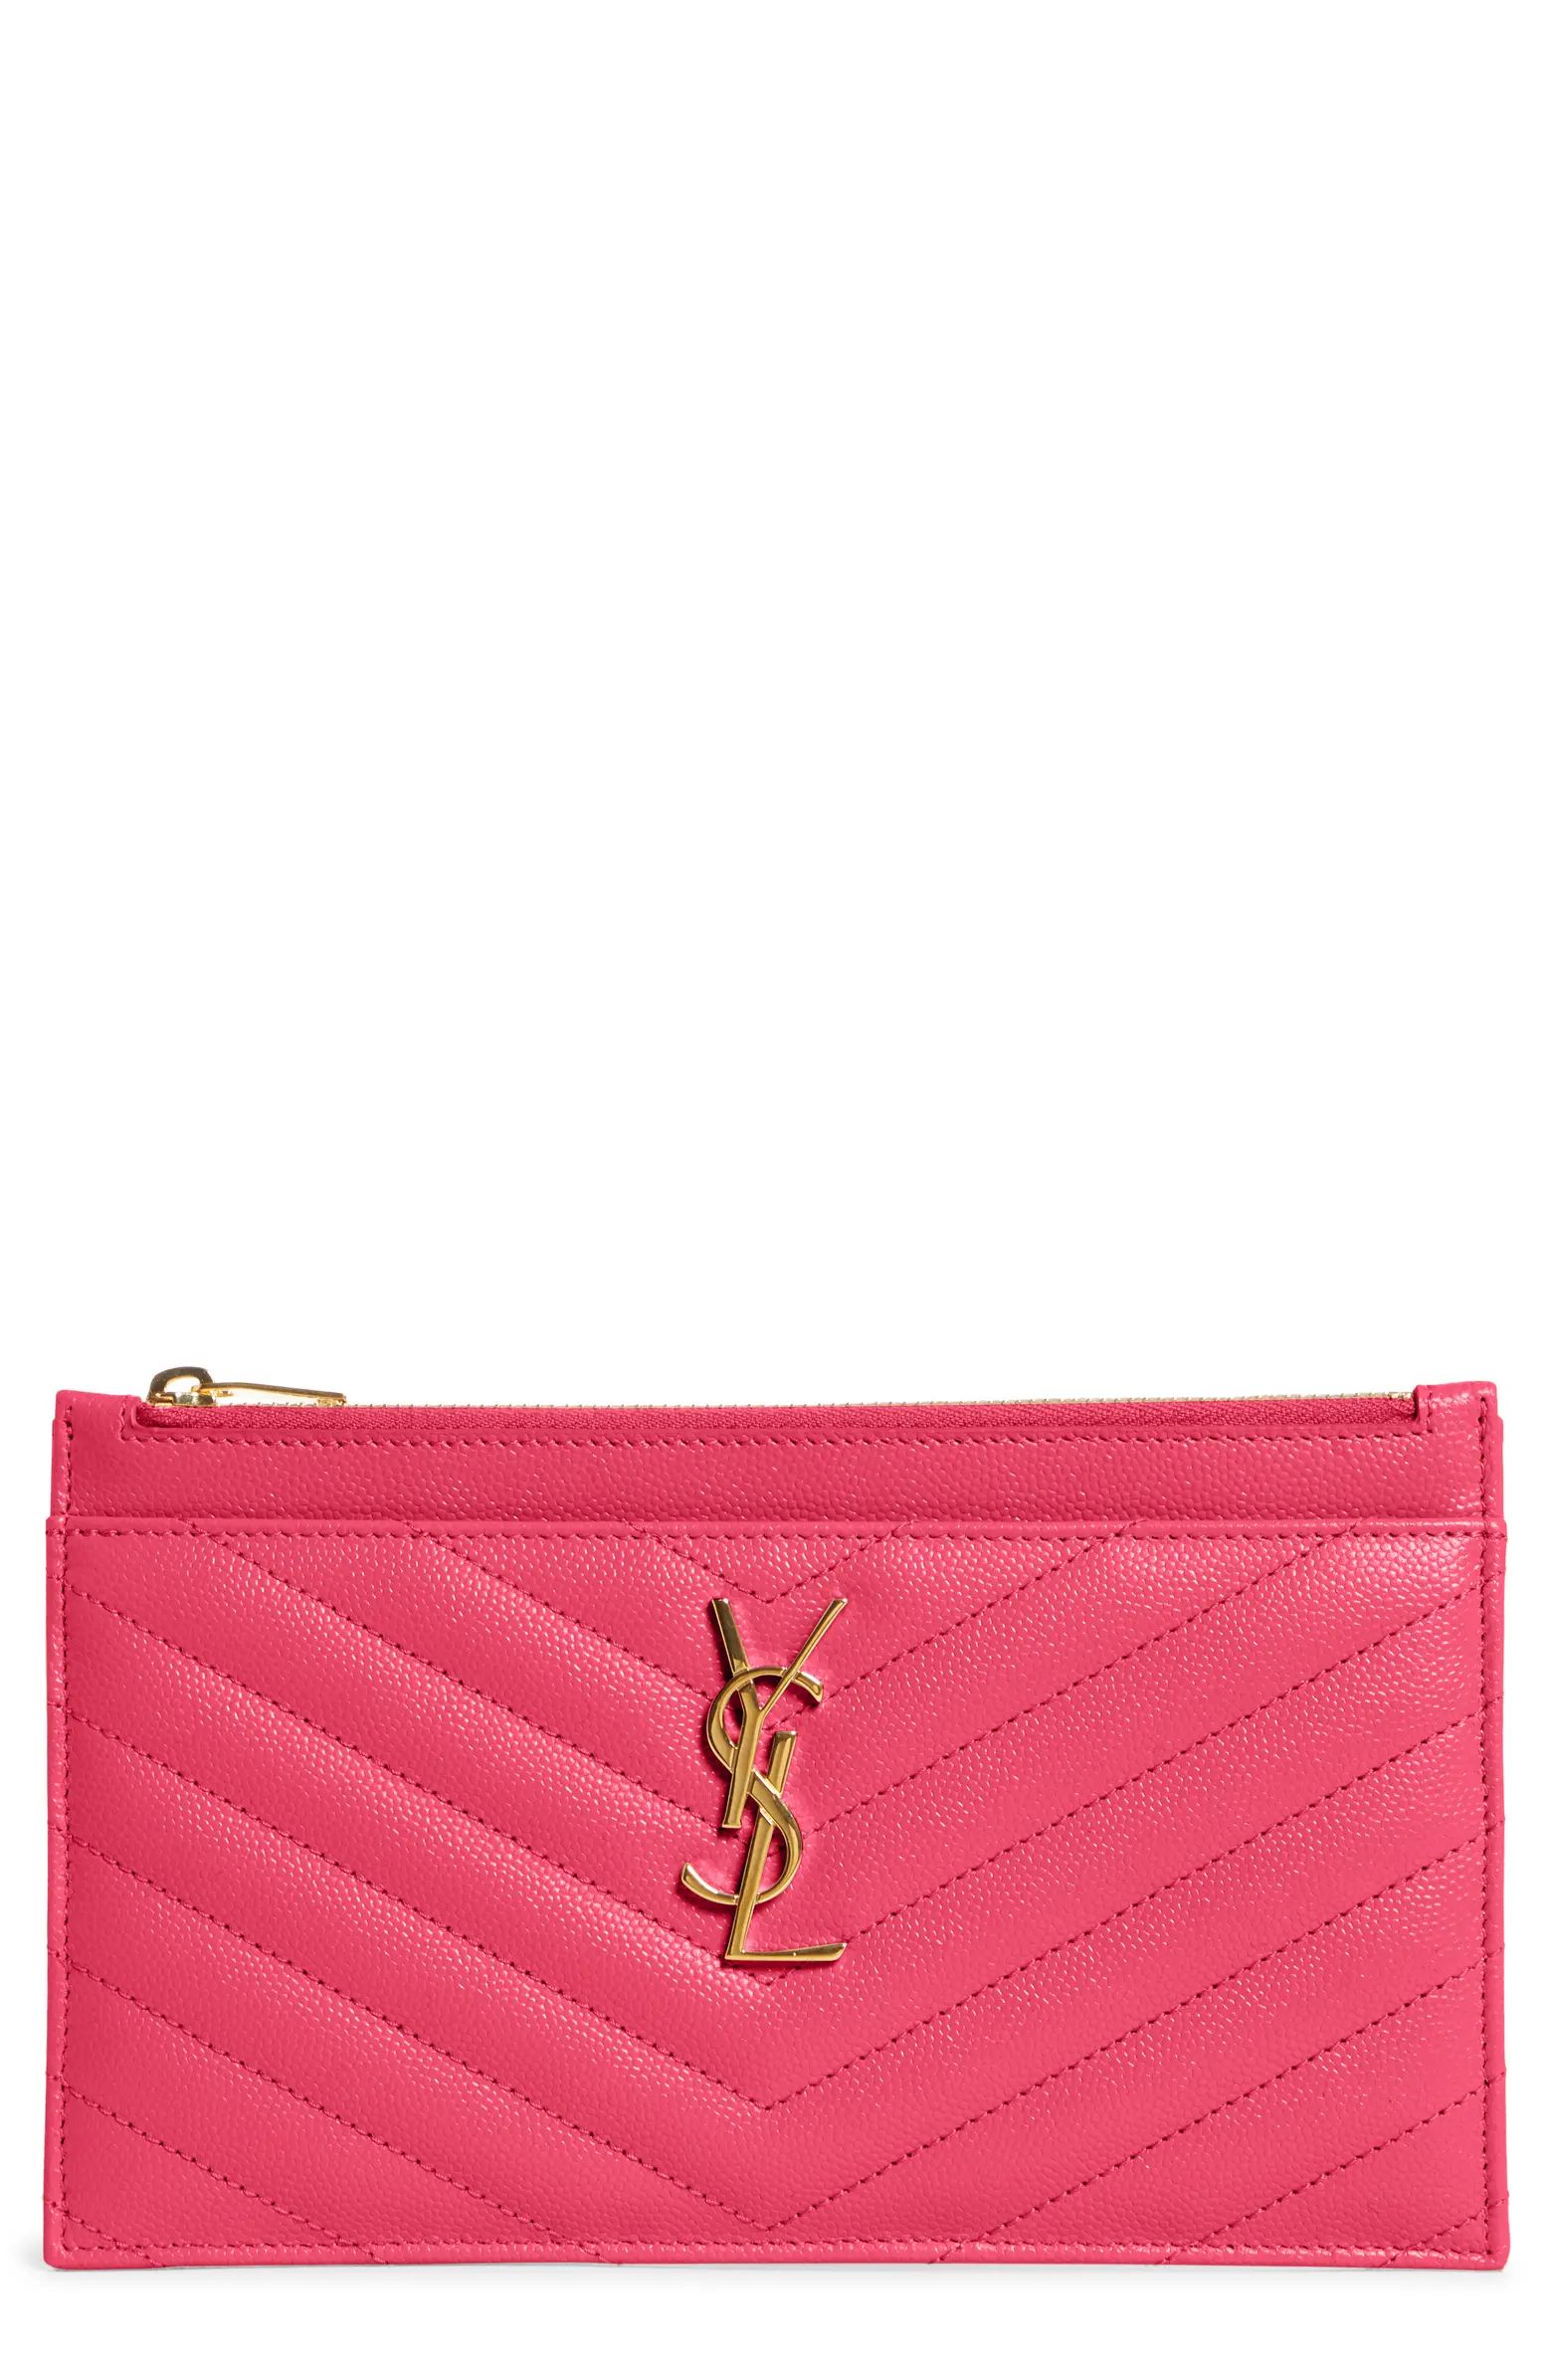 Saint Laurent Monogramme Quilted Leather Zip Pouch | Nordstrom | Nordstrom